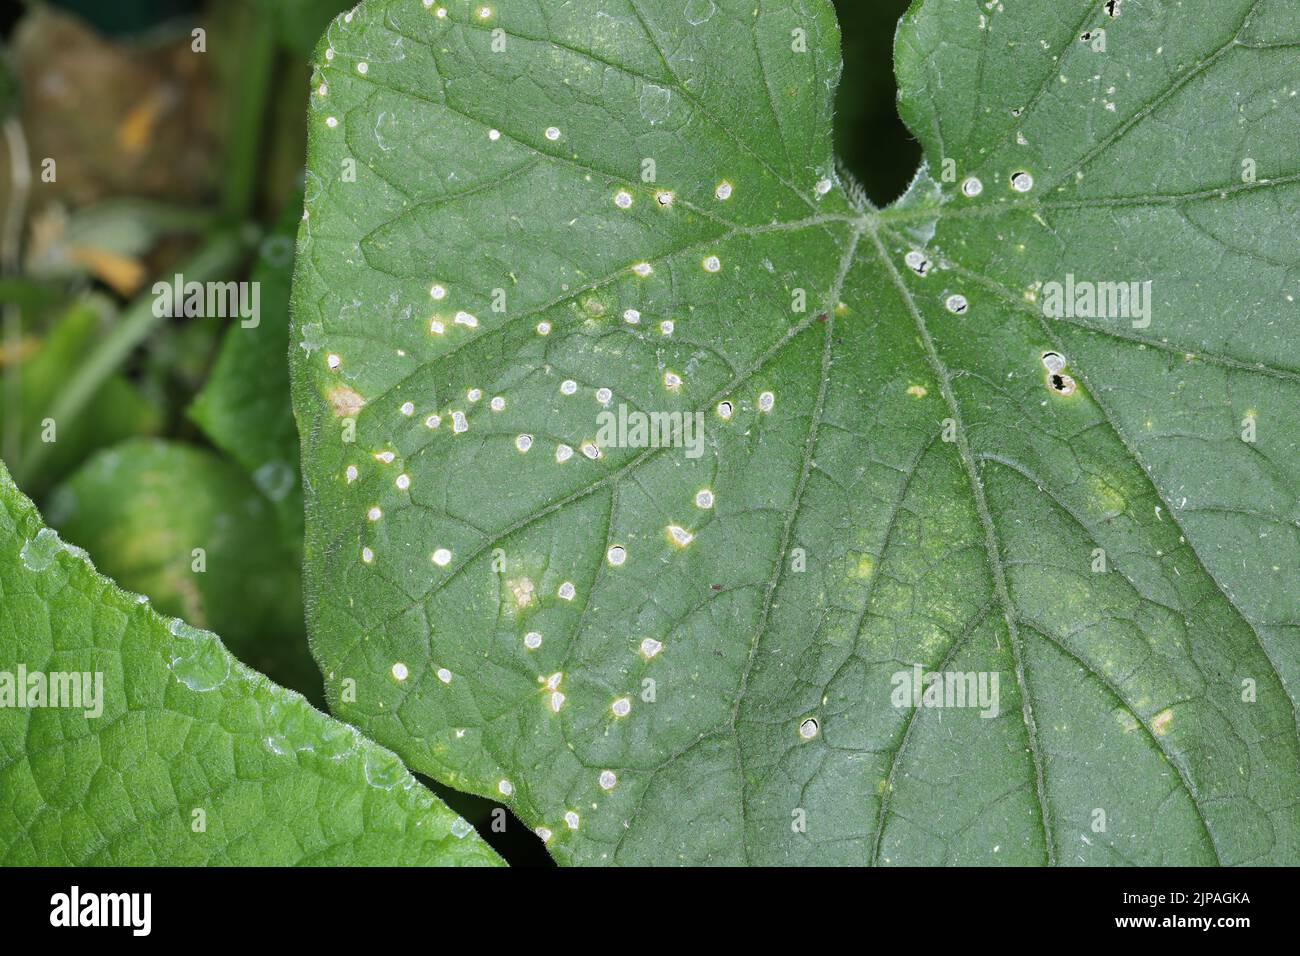 White round spots on the leaves of cucumber in the garden, a fungal disease. Stock Photo